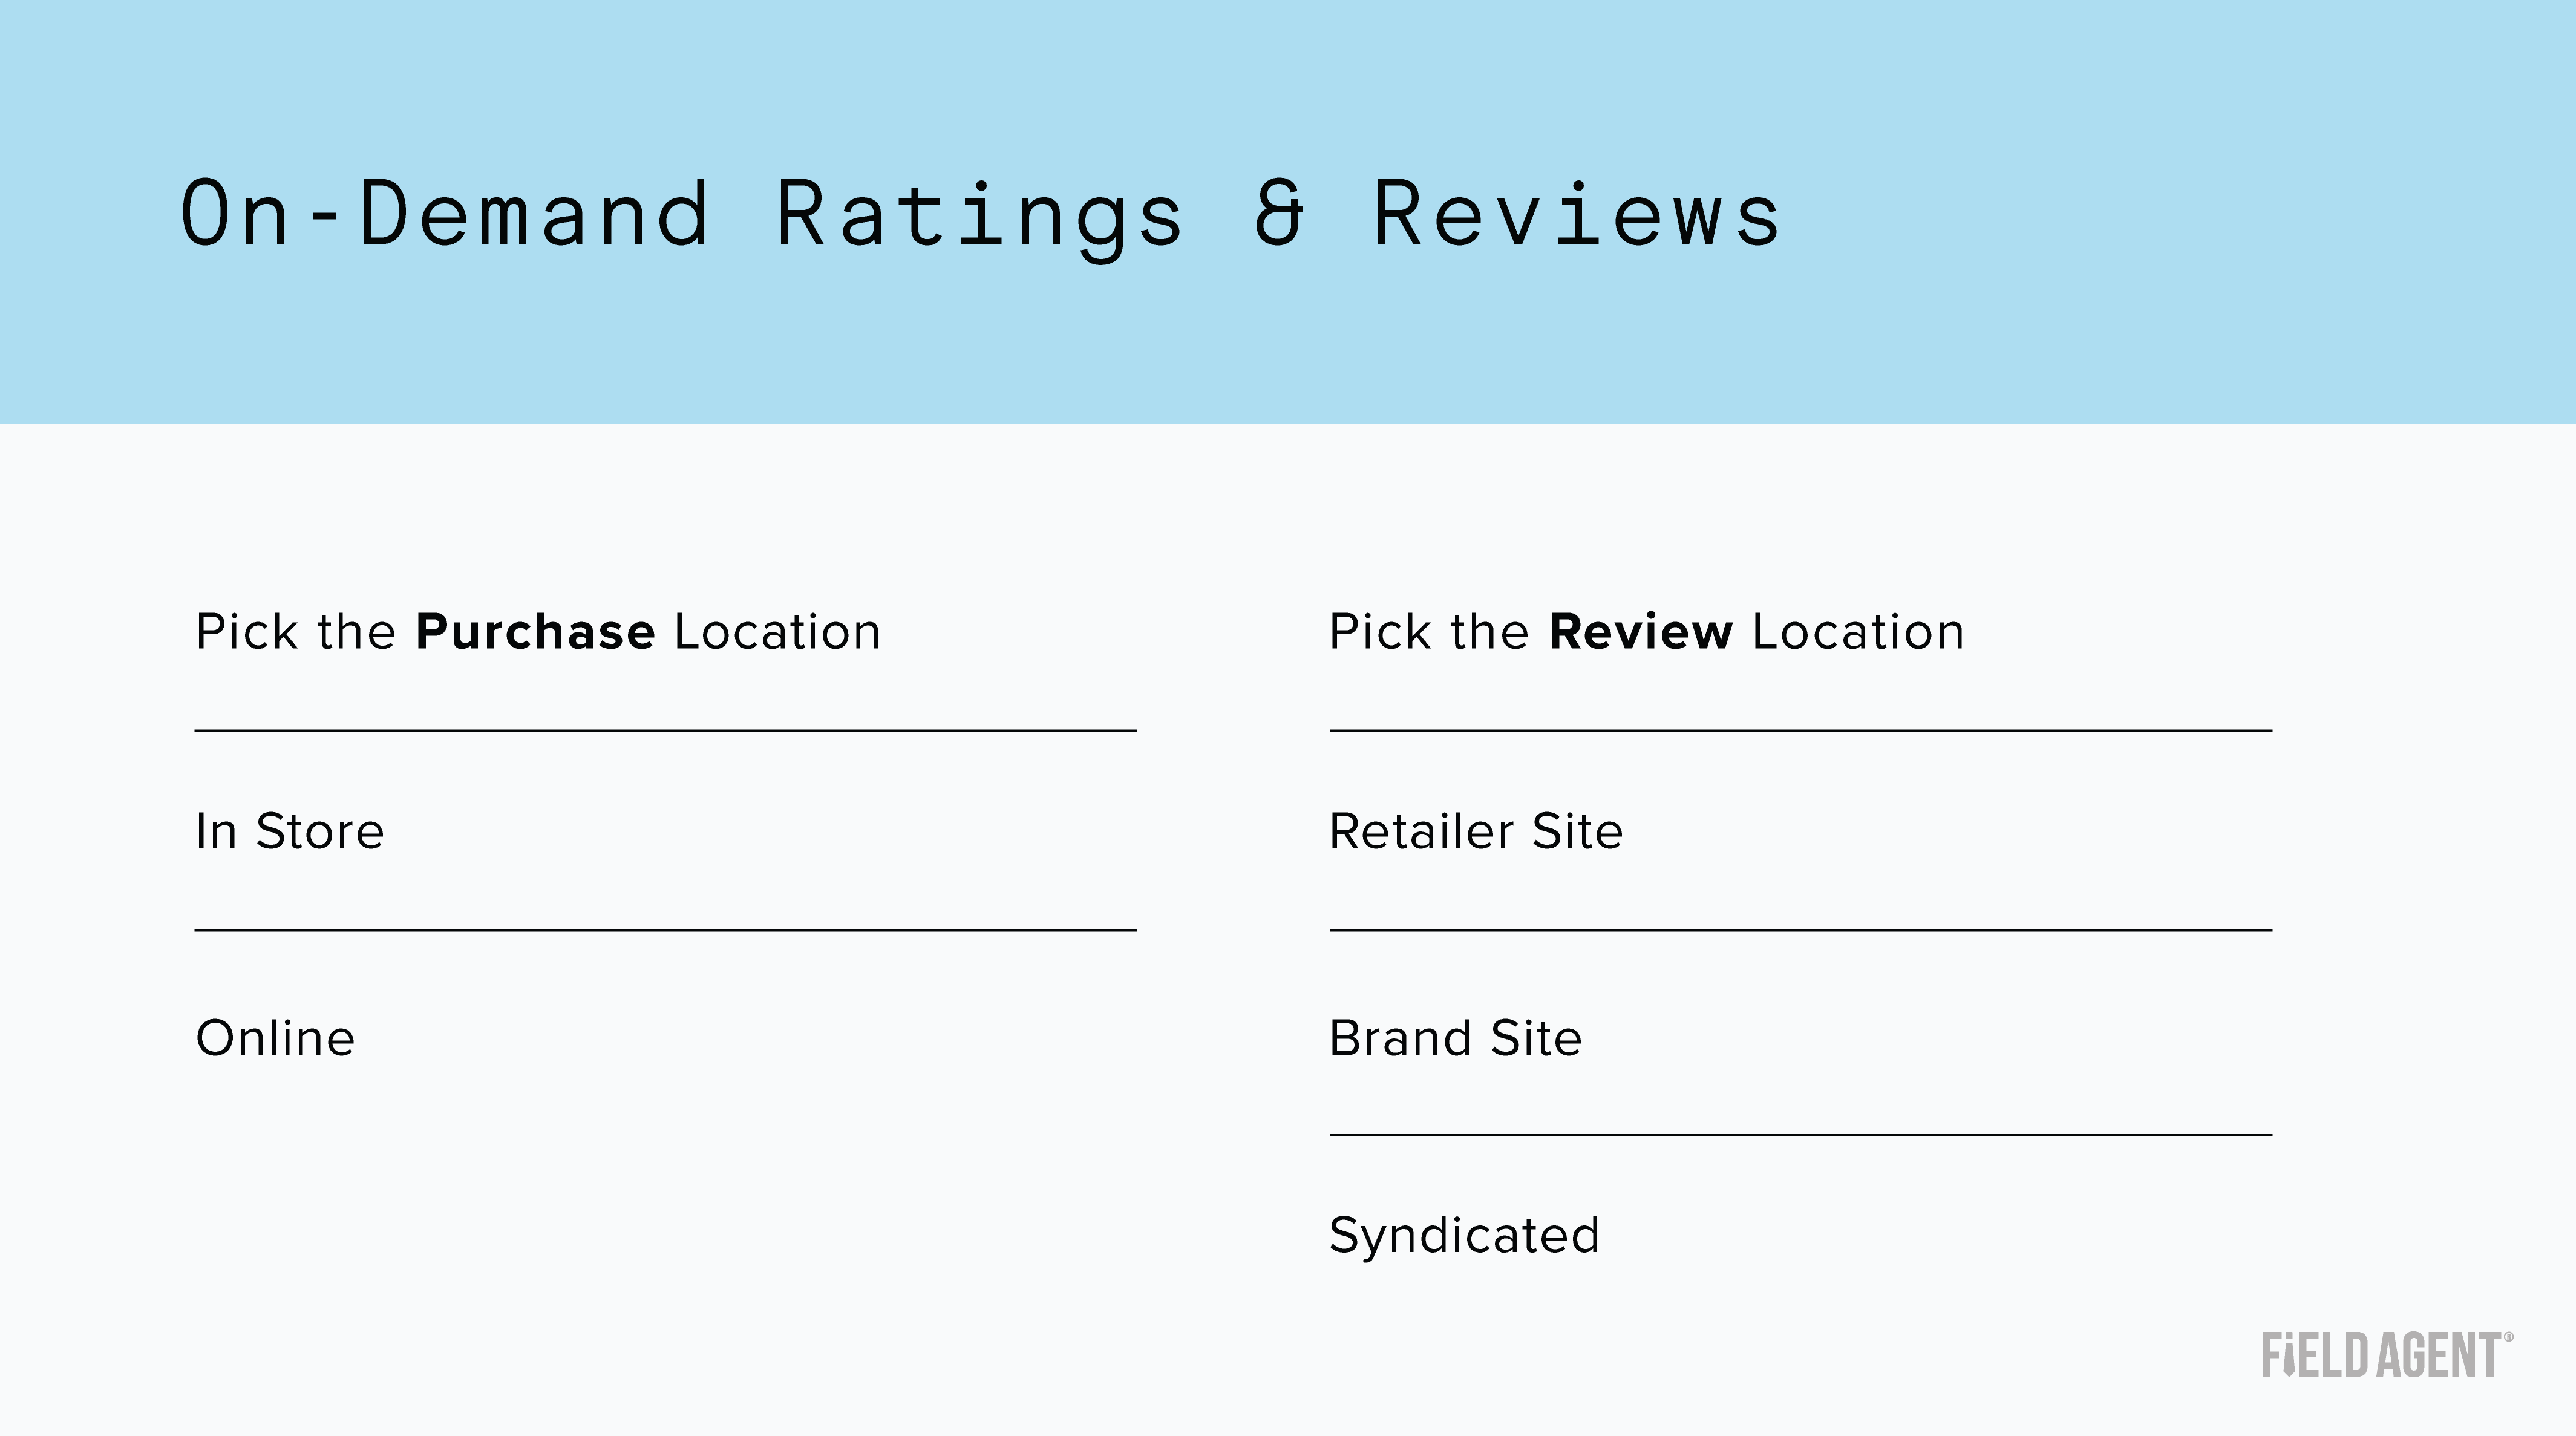 How on-demand ratings and reviews work in two questions